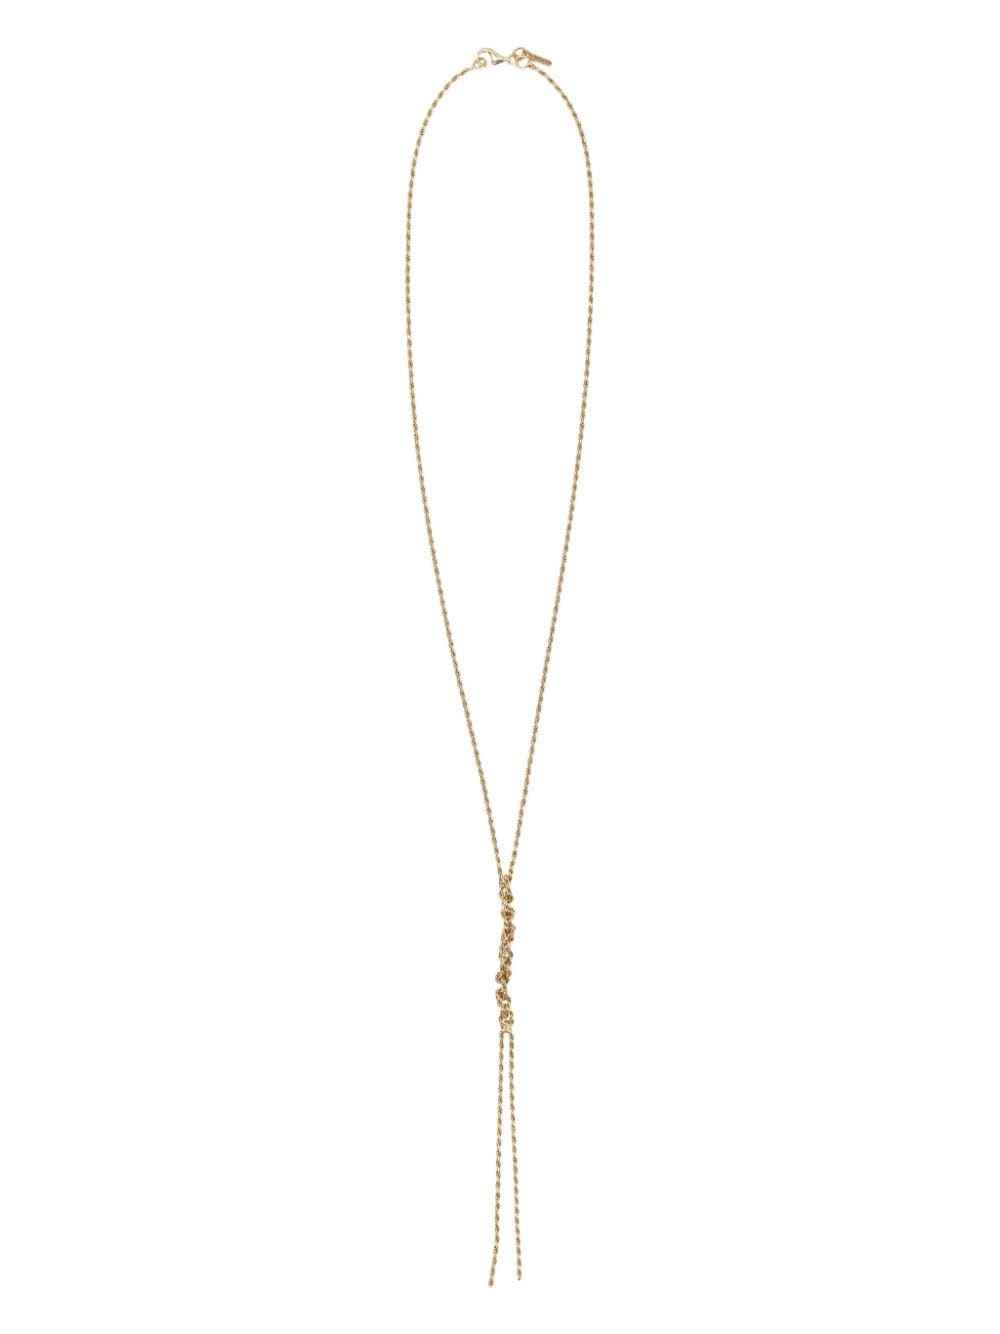 Emanuele Bicocchi Knotted Drop Necklace In Metallic